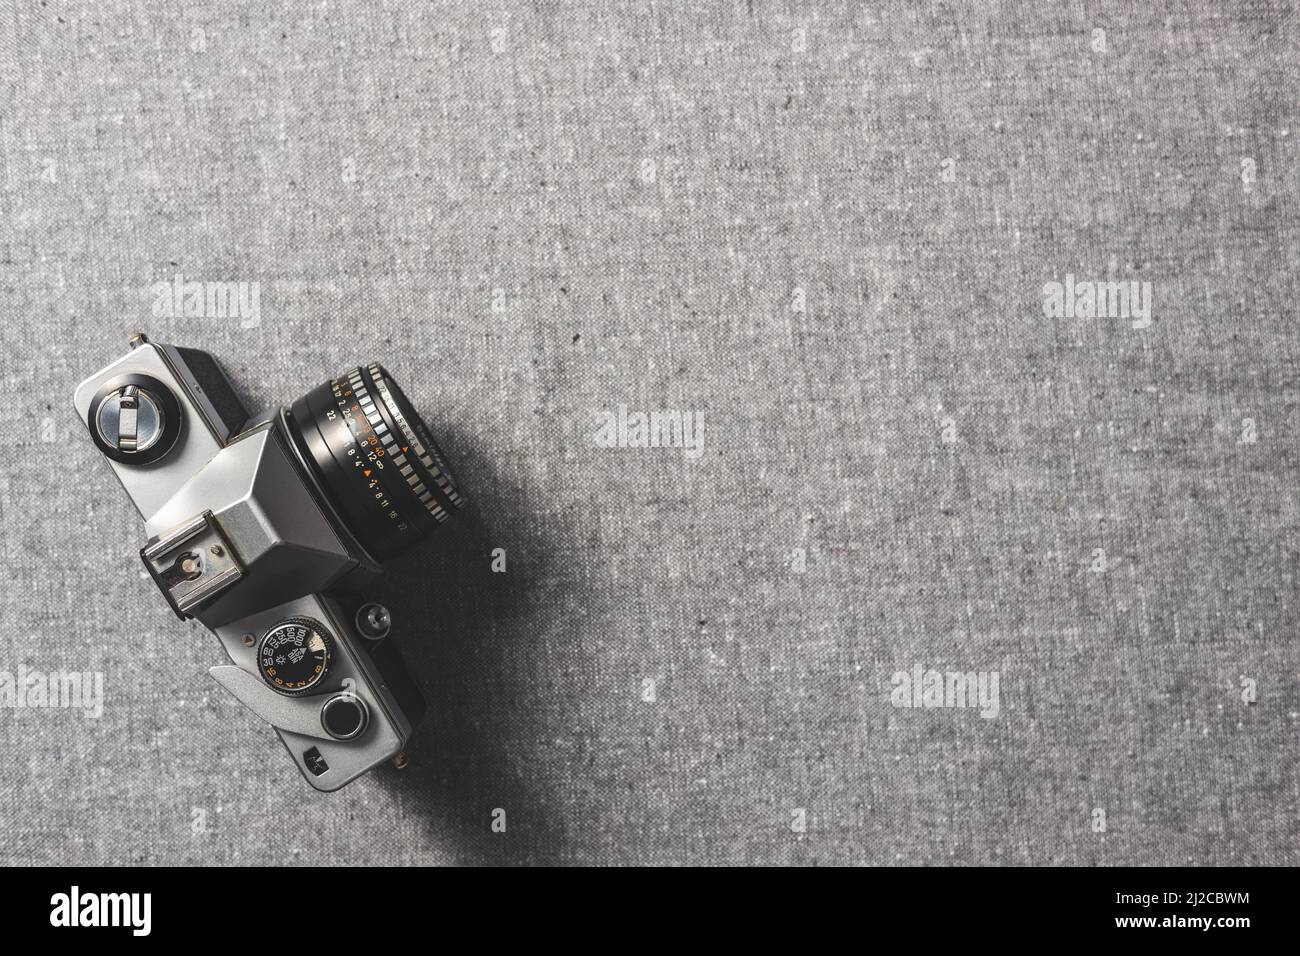 Retro analogue camera. Vintage old fashioned camera with lens on gray canvas. Top view. Stock Photo